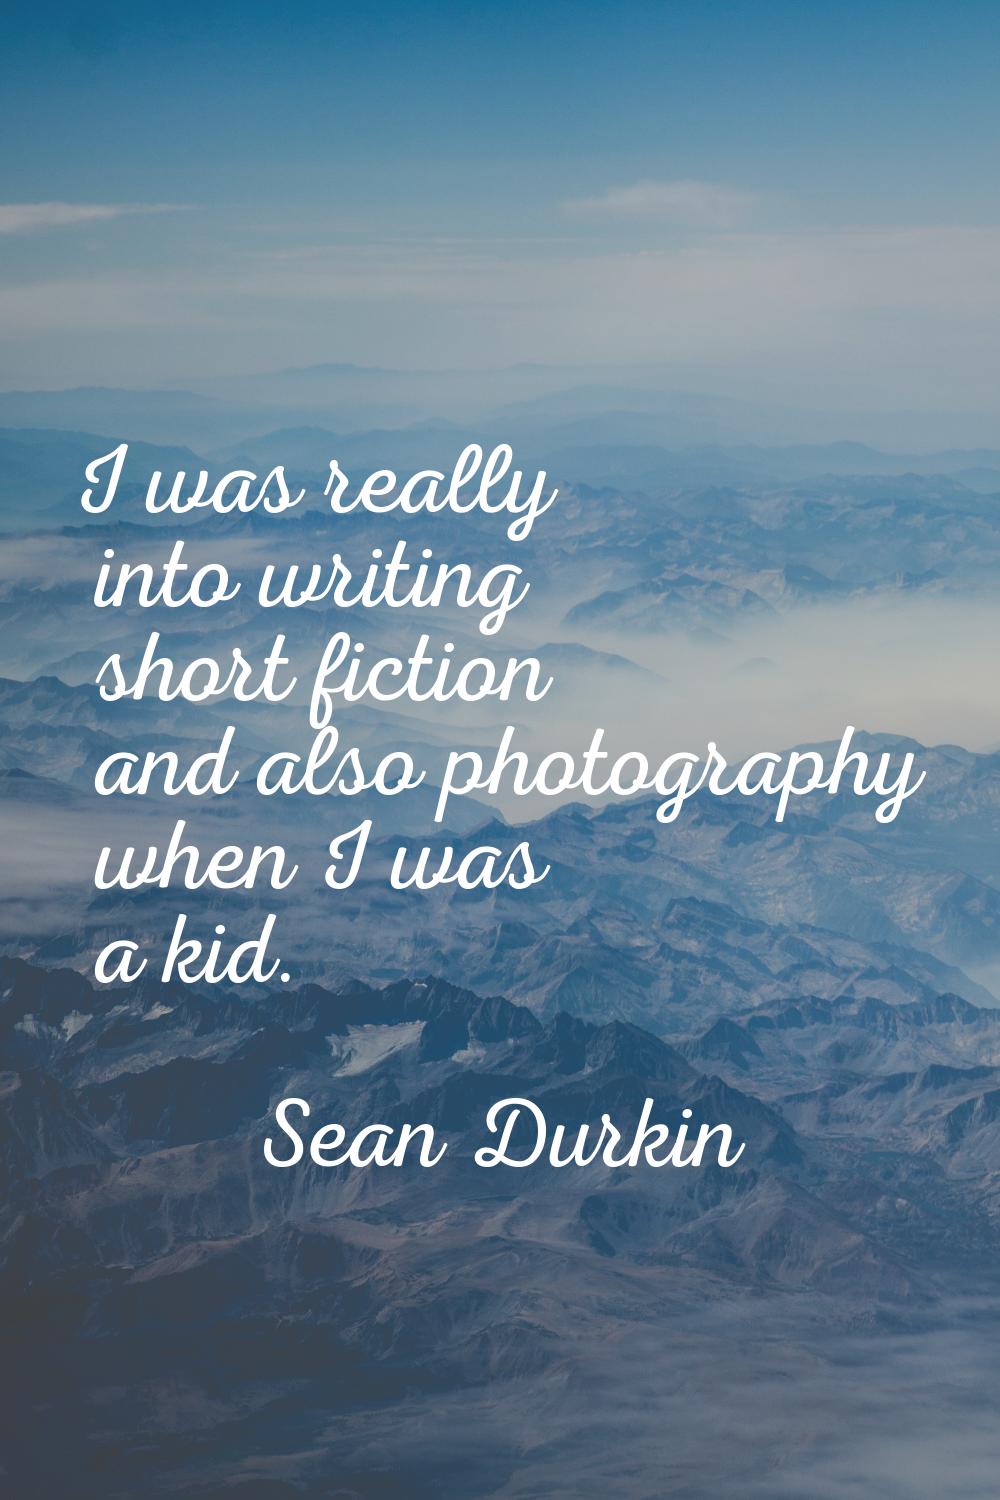 I was really into writing short fiction and also photography when I was a kid.